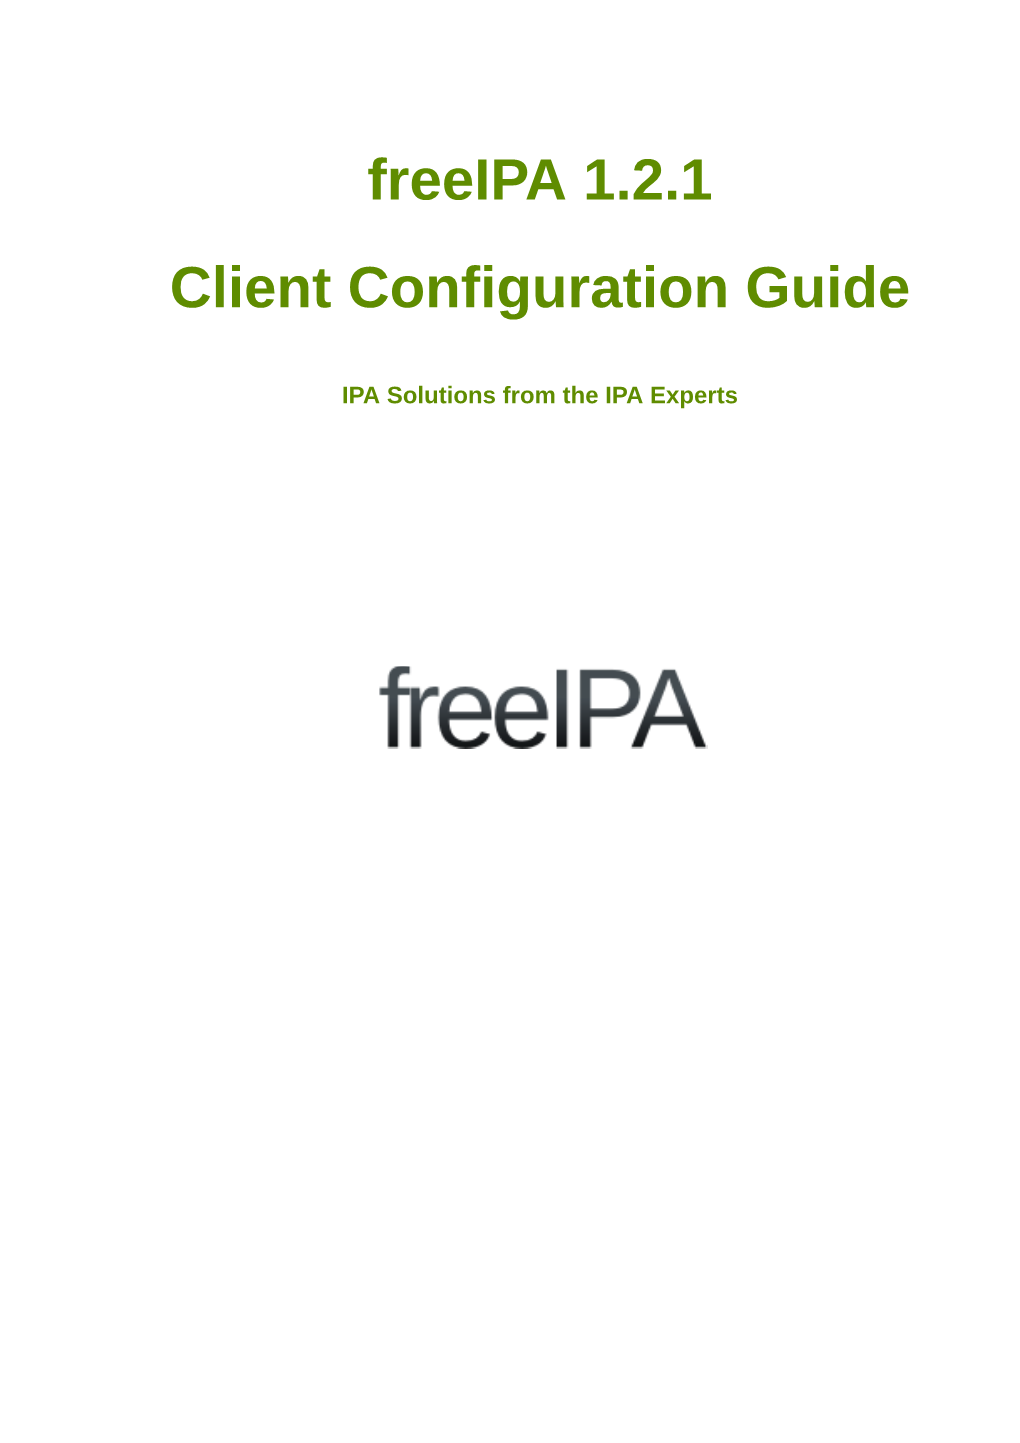 Freeipa 1.2.1 Client Configuration Guide